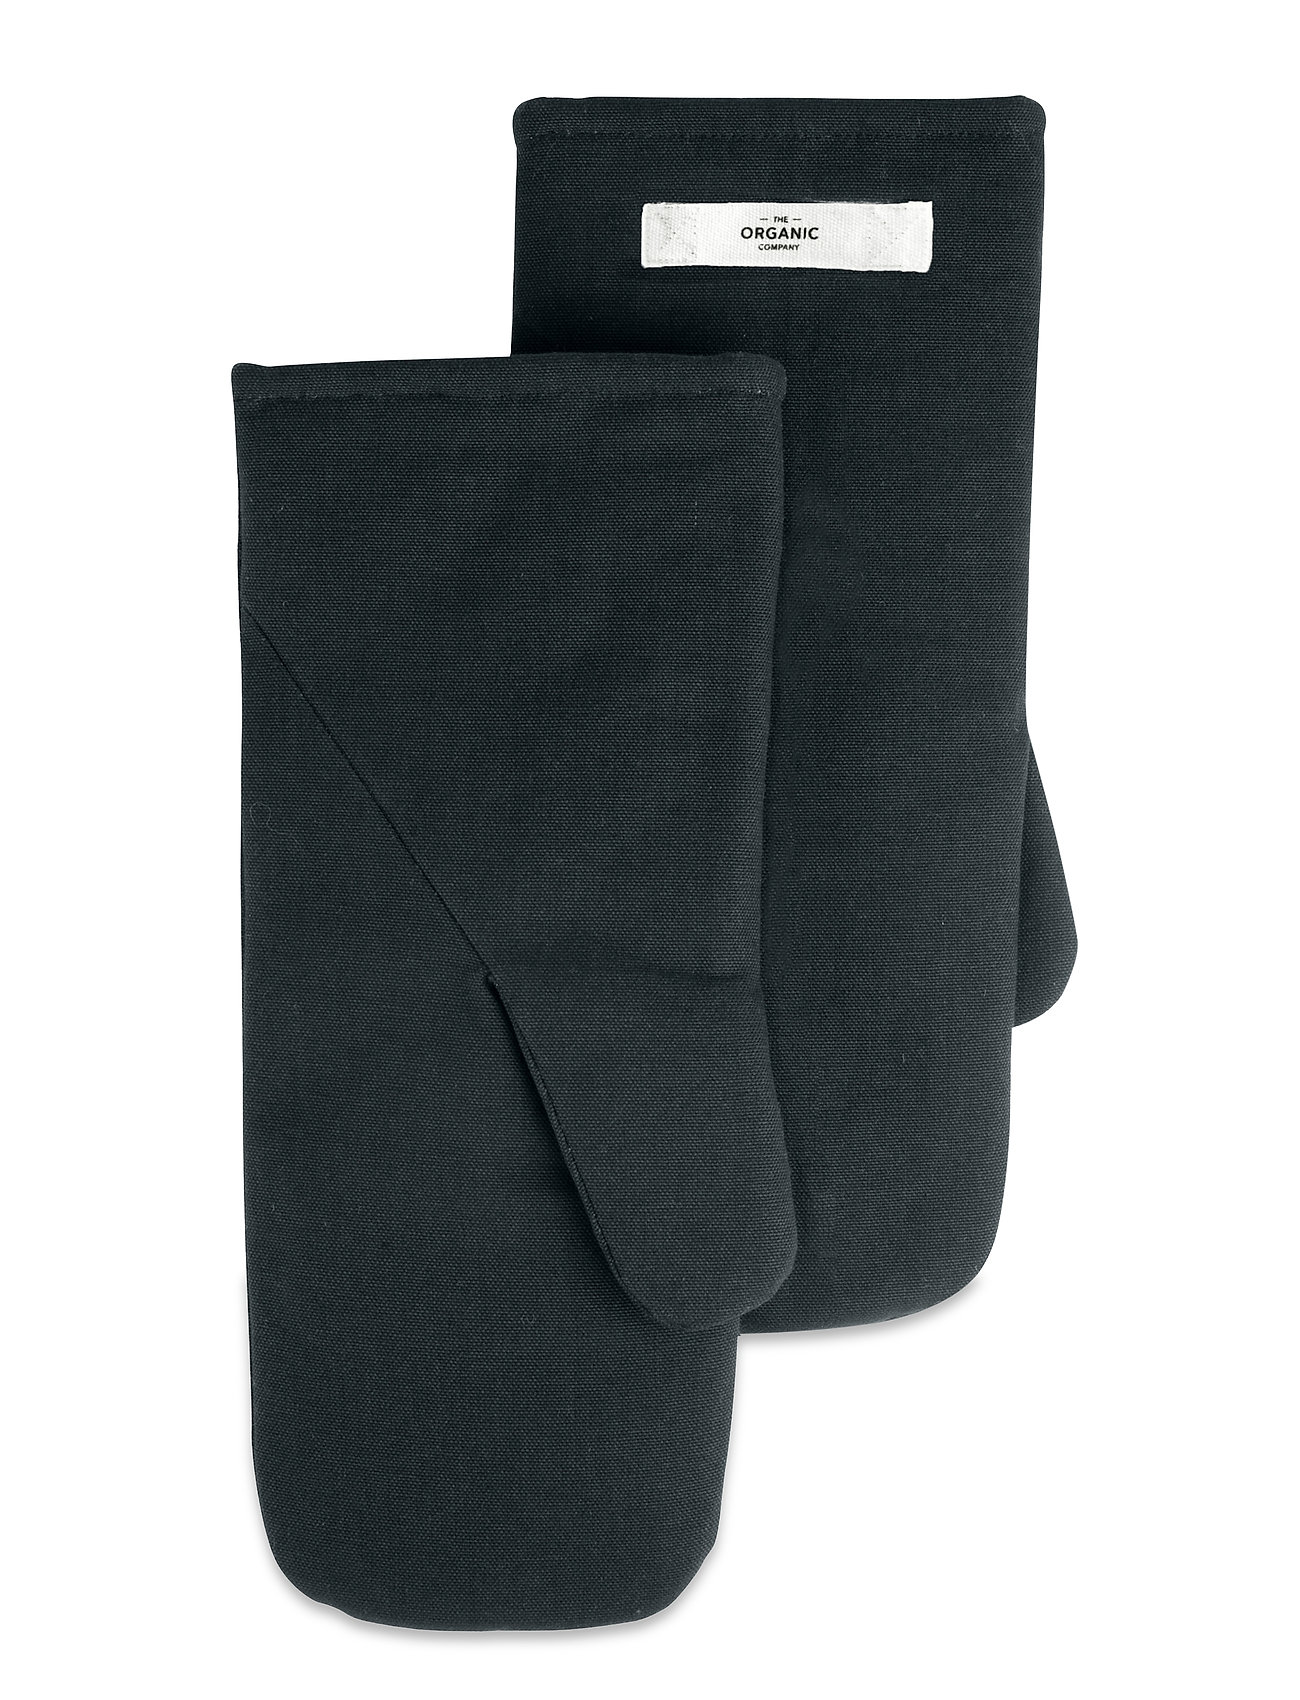 Oven Mitts Medium Home Textiles Kitchen Textiles Oven Mitts & Gloves Grey The Organic Company